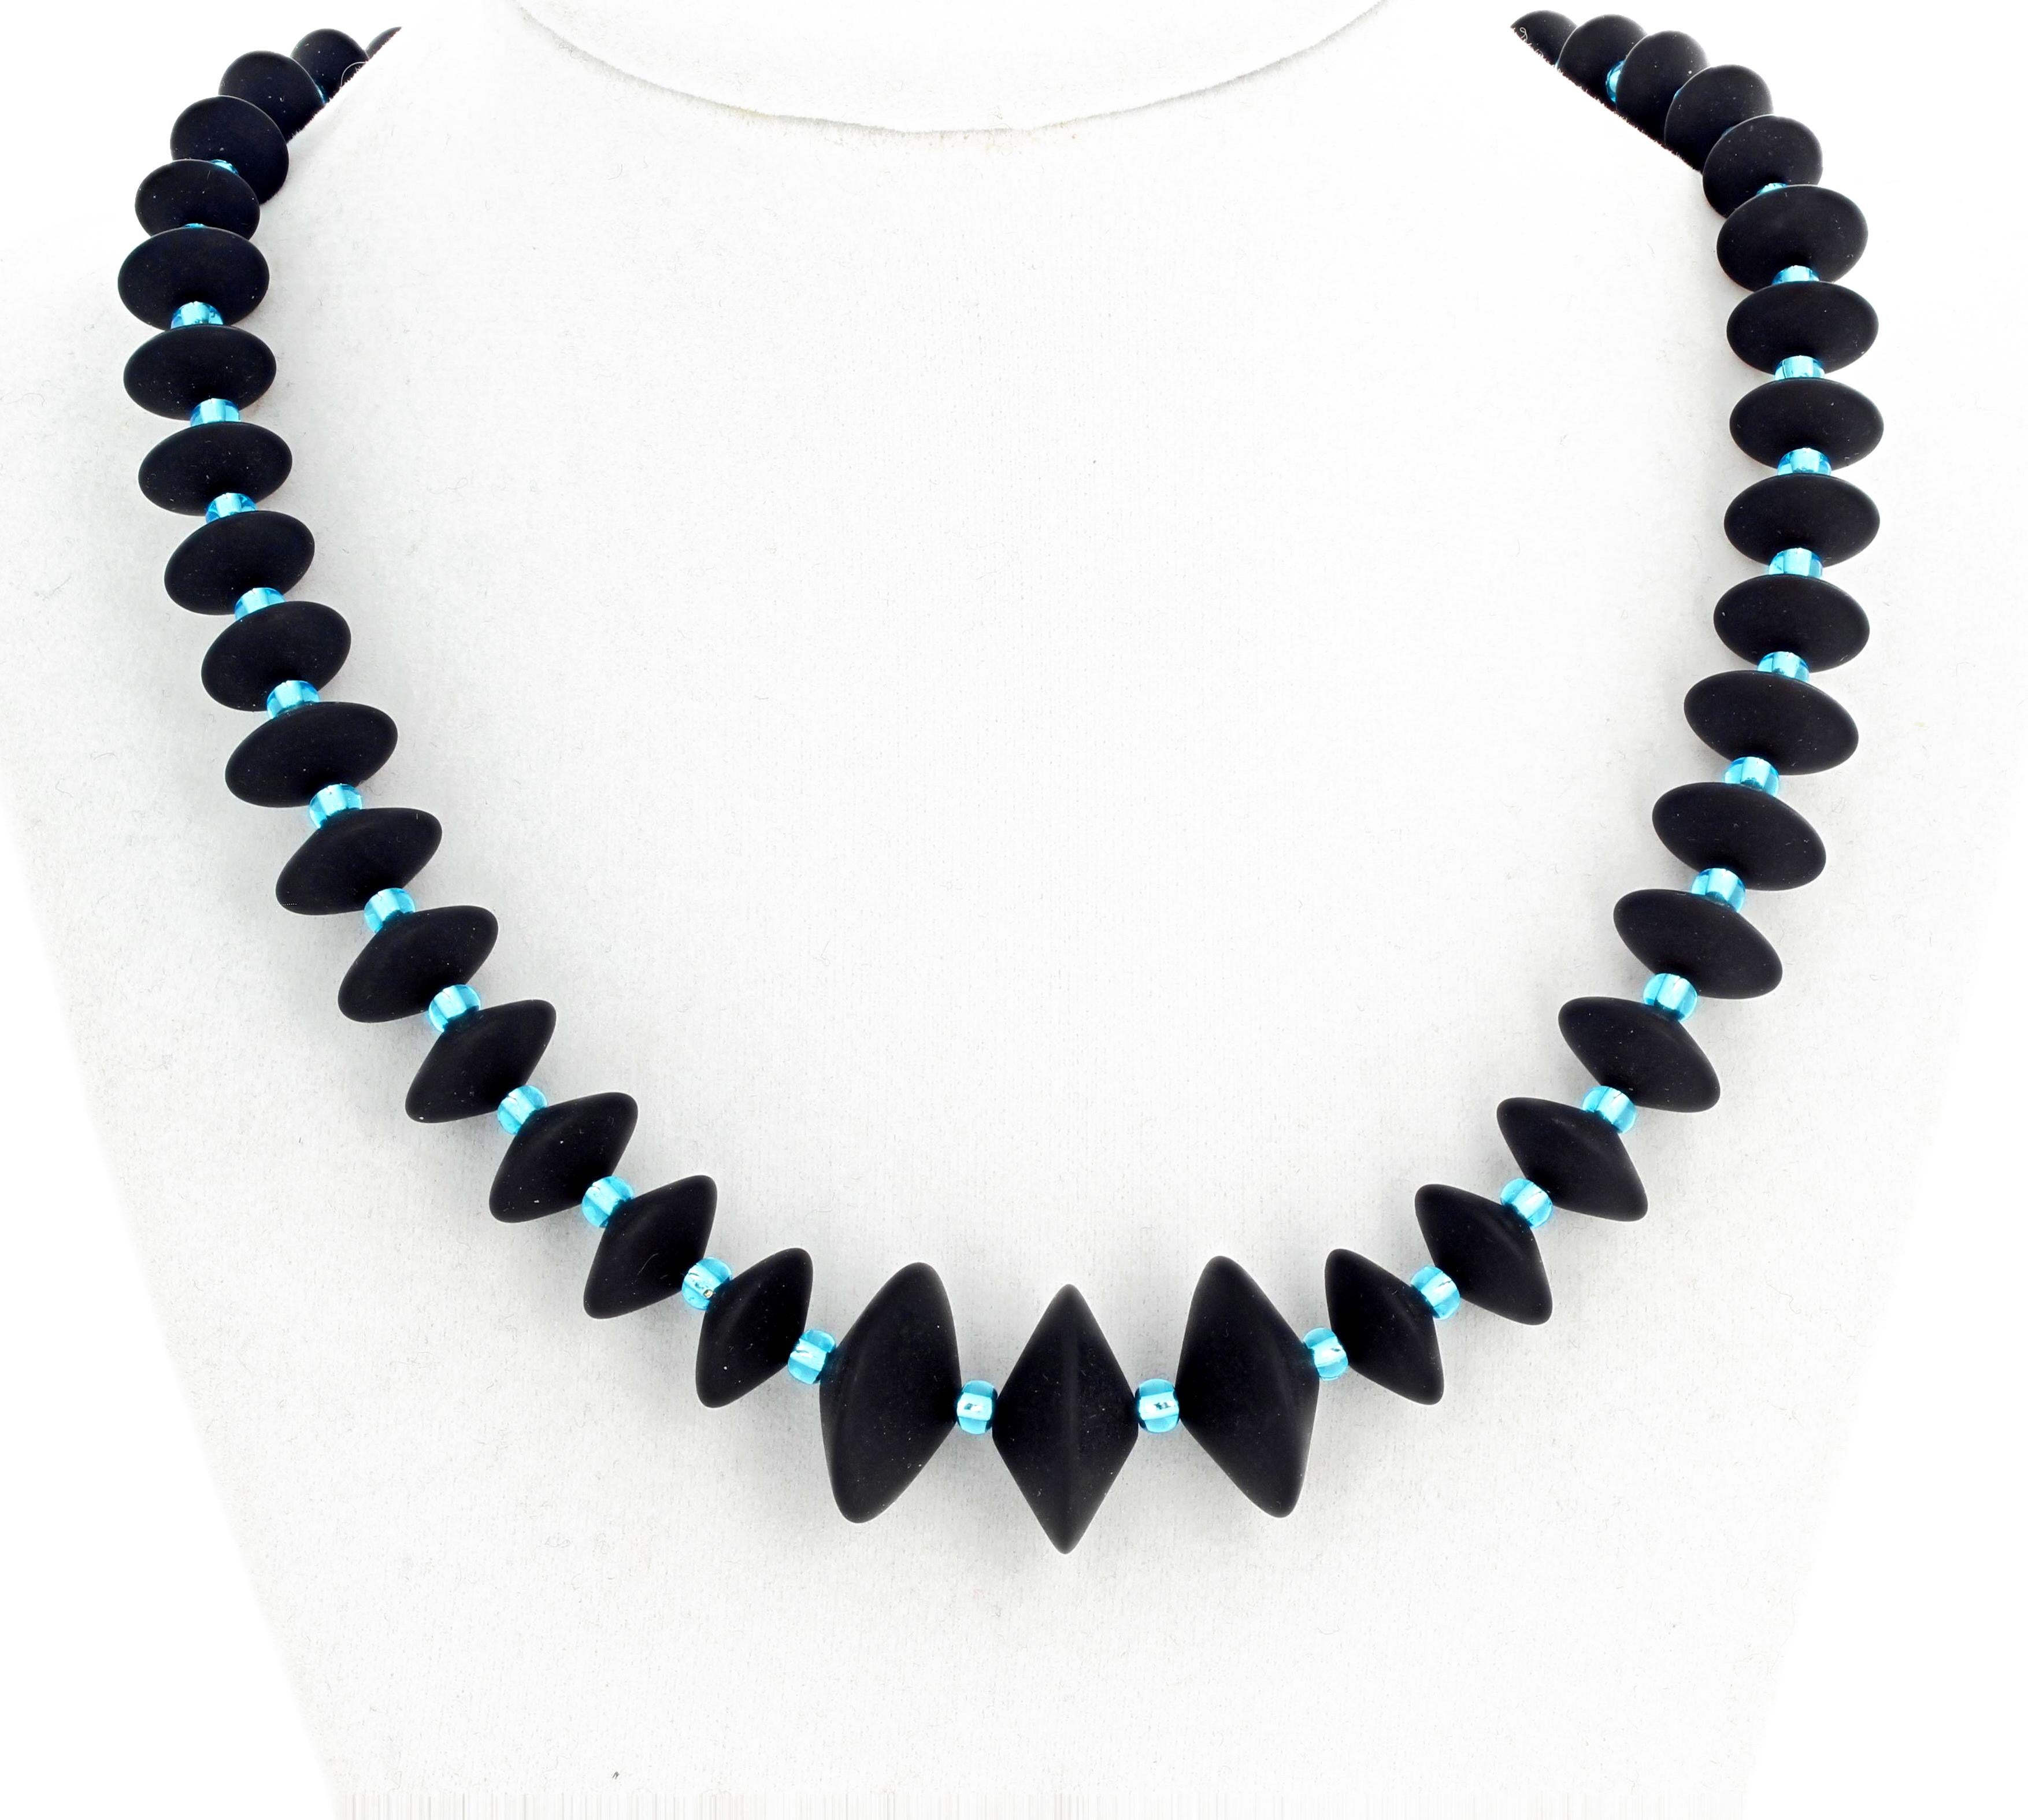 Unique Black Onyx rondels (largest 20 mm) enhanced with brilliant glittering blue Czech crystals set in an 18 inch long necklace with gold tone hook clasp.  